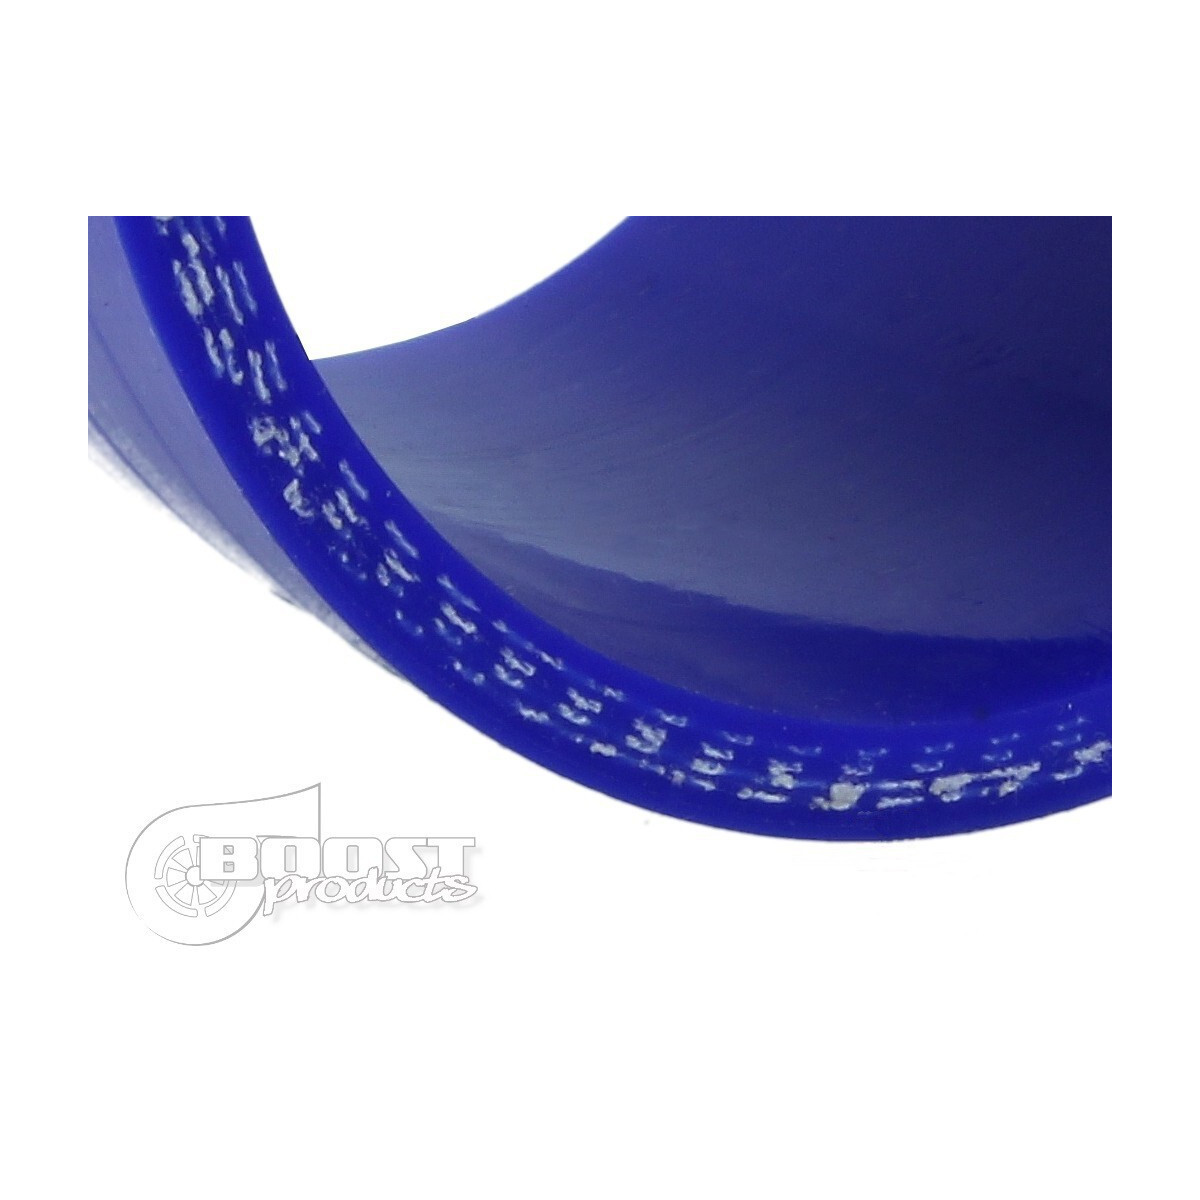 BOOST products Silicone Hose 28mm, 1m Length, blue